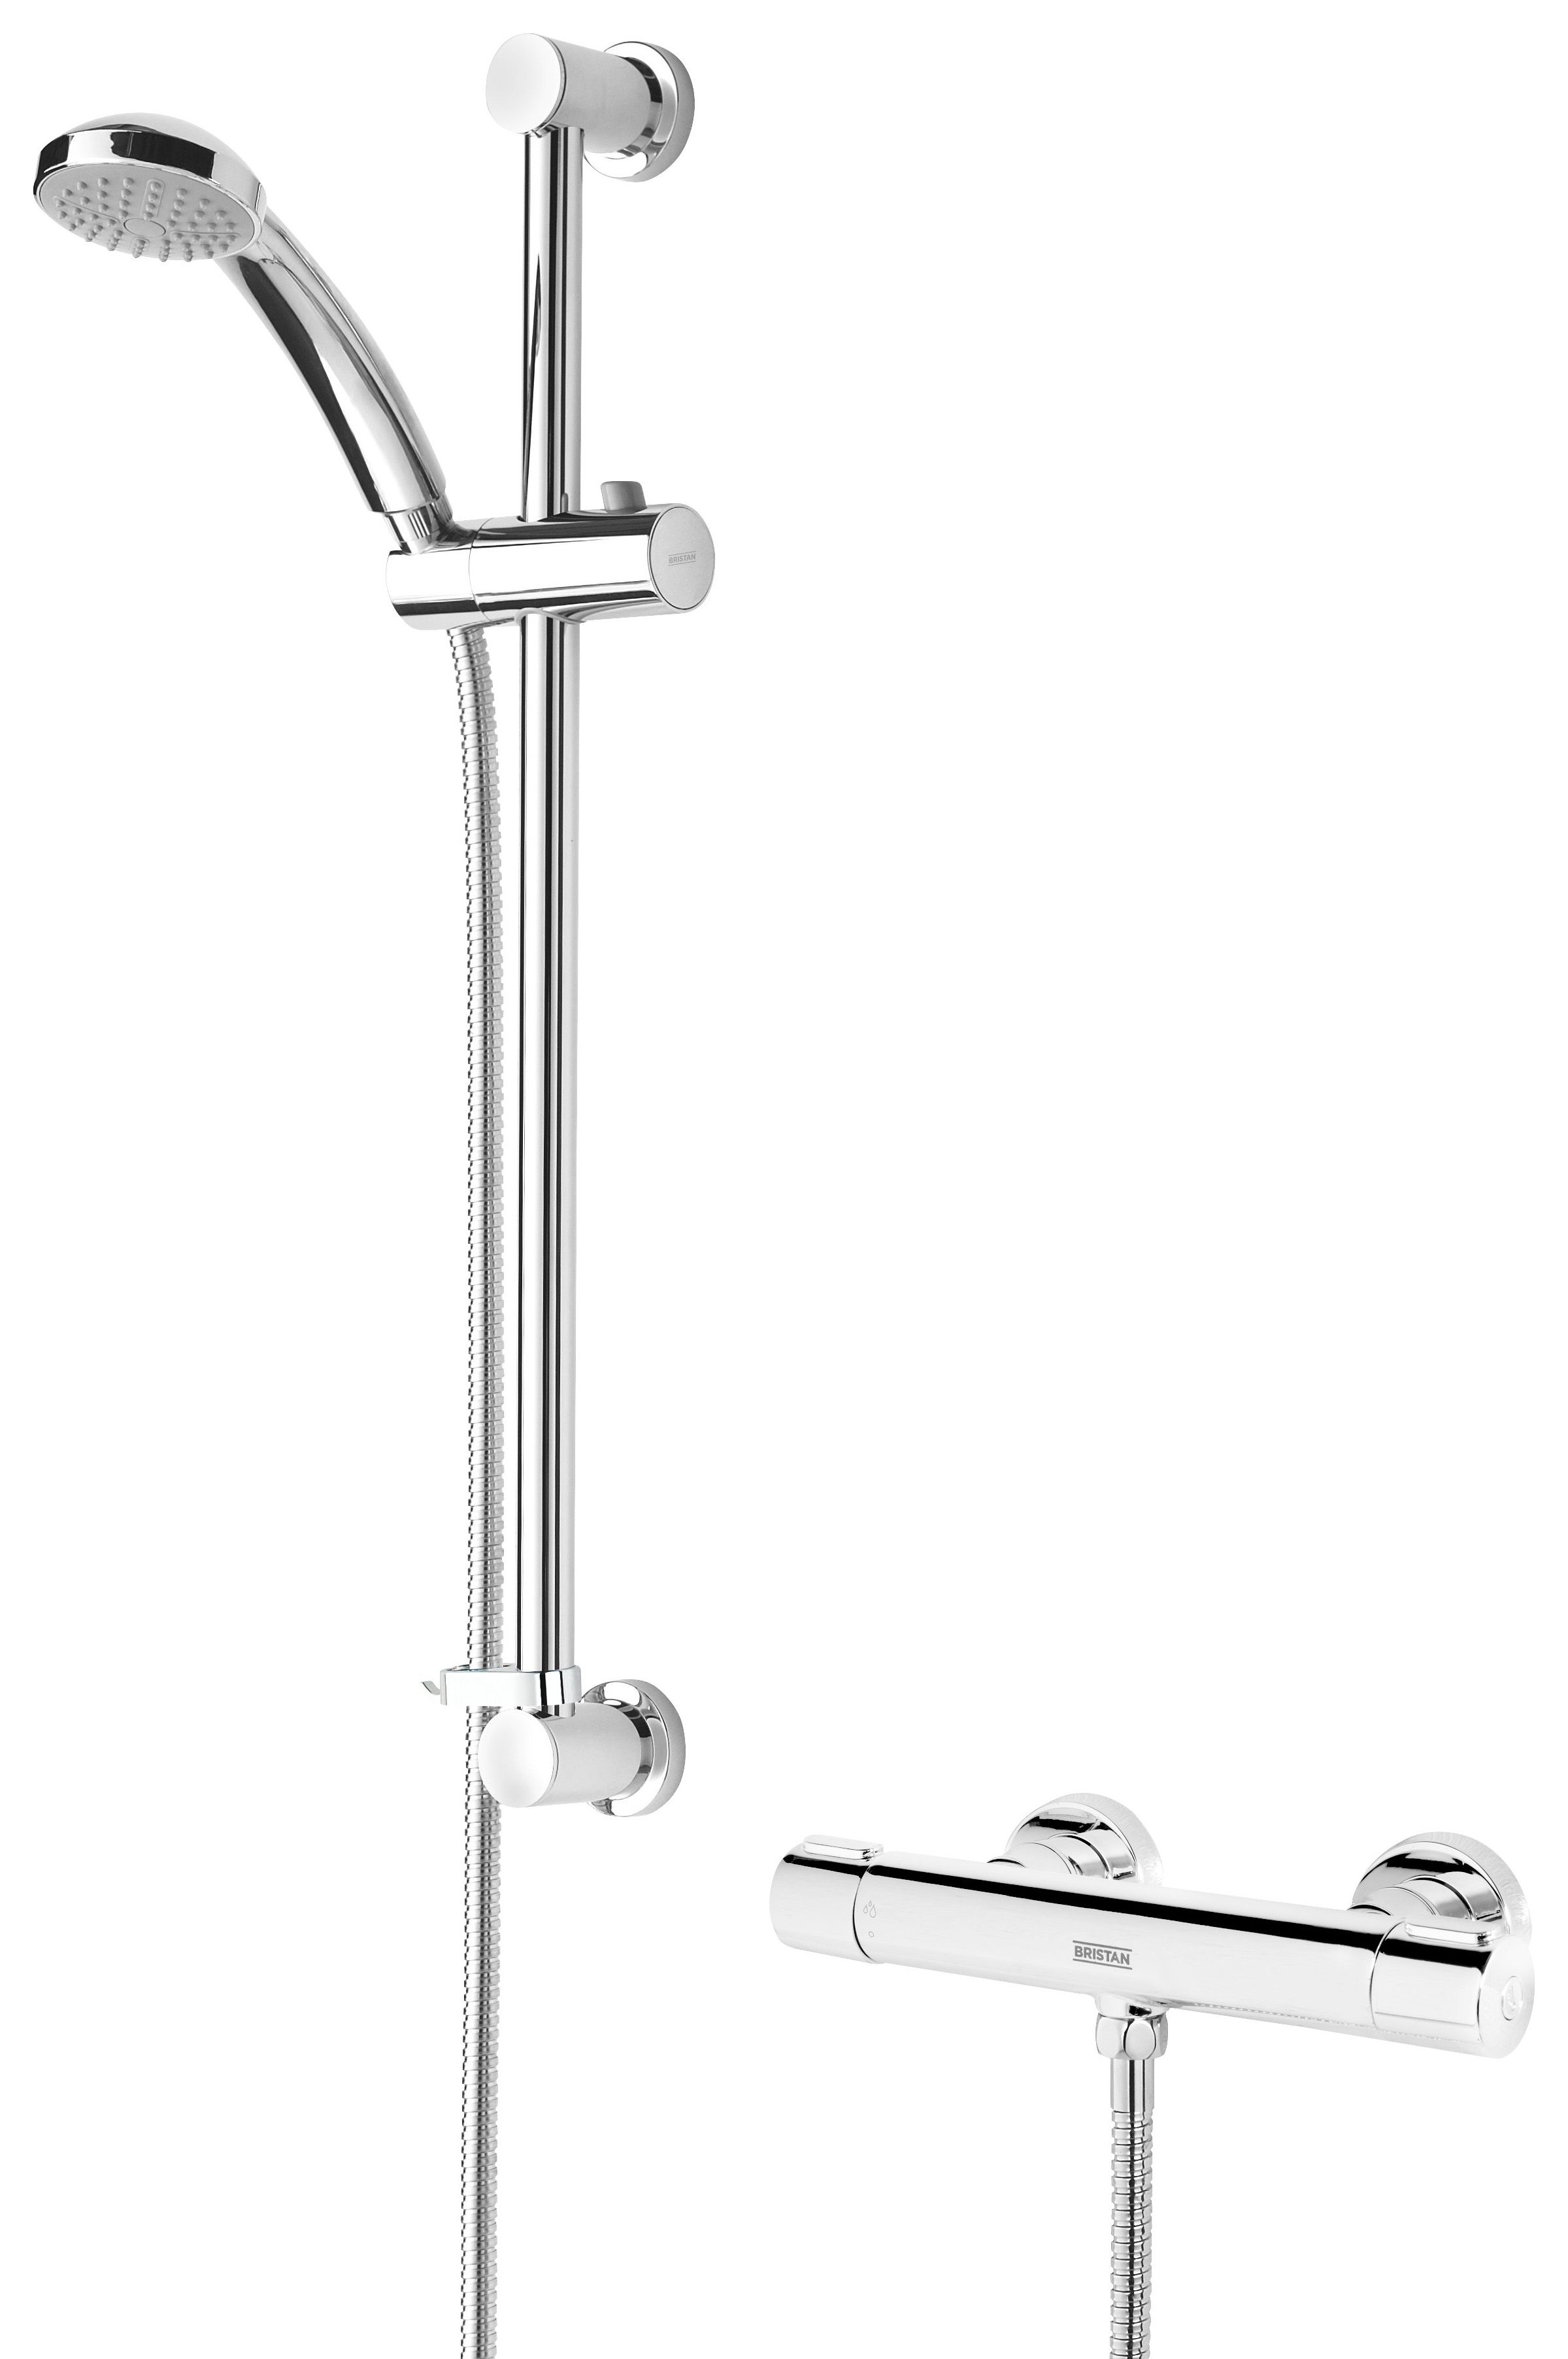 Bristan Frenzy Safe Touch Mixer Shower with Kit & Fast Fit Connections - Chrome